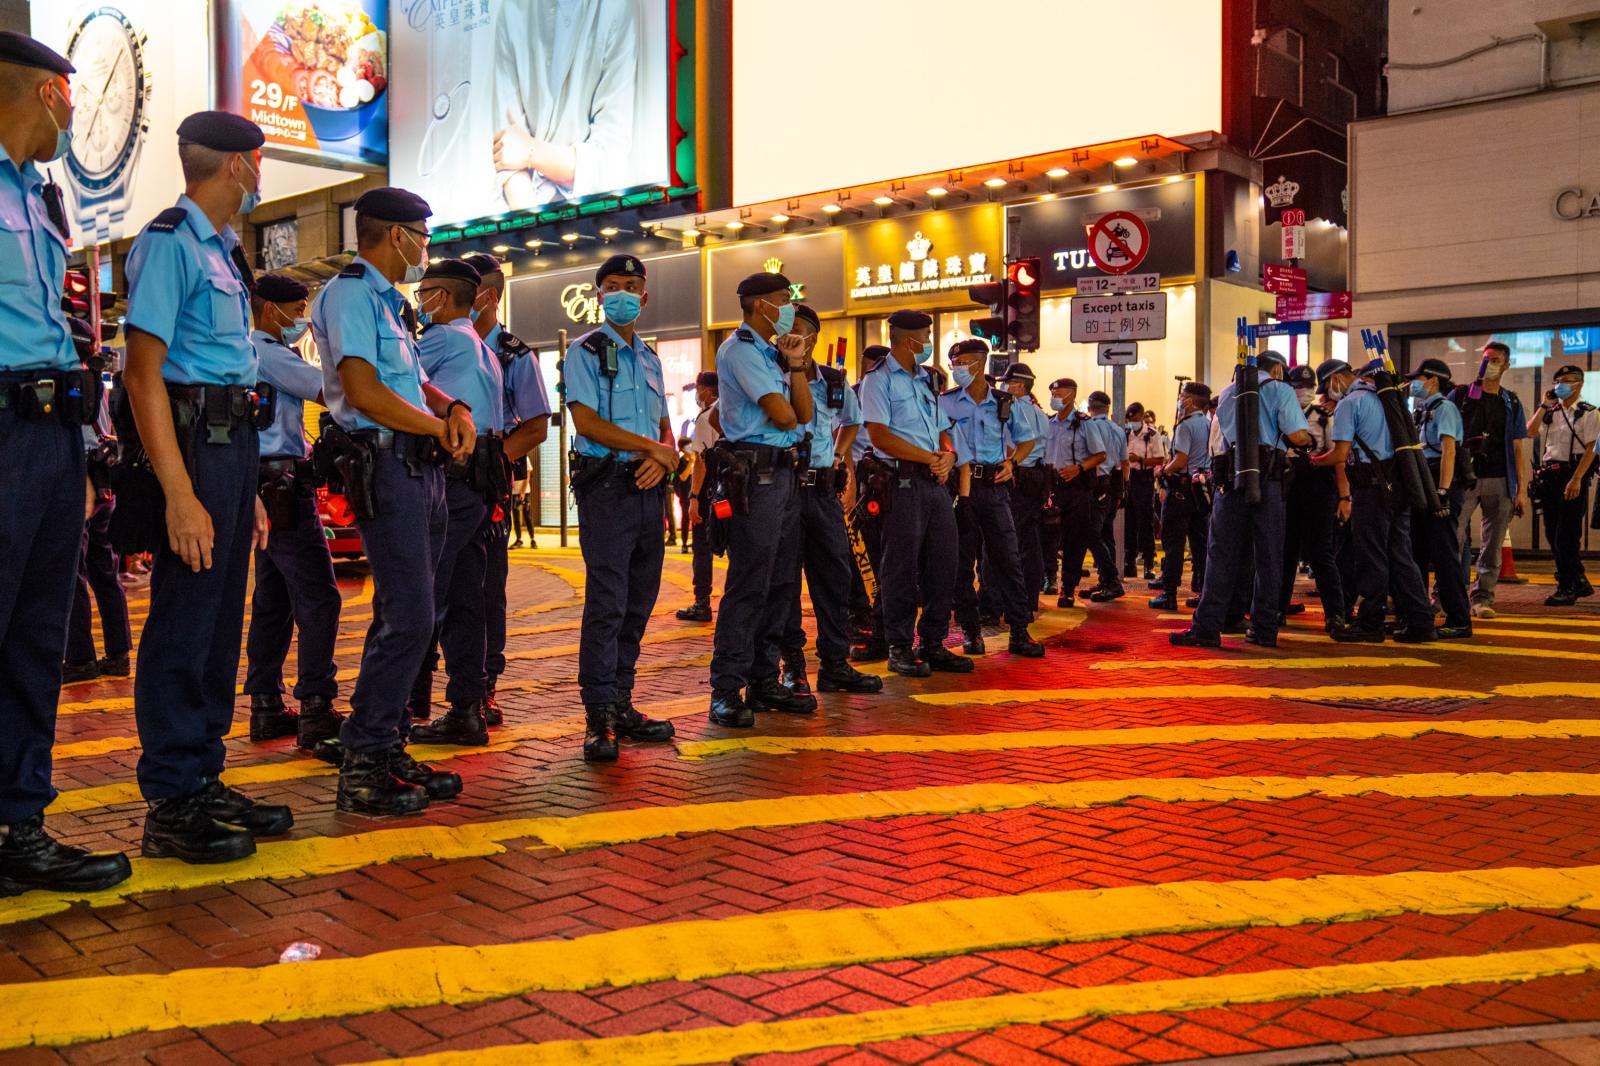 [2019-2021] Hong Kong Protests: Behind the Front Lines - June 4, 2021 (Victoria Park) - For the second time since...